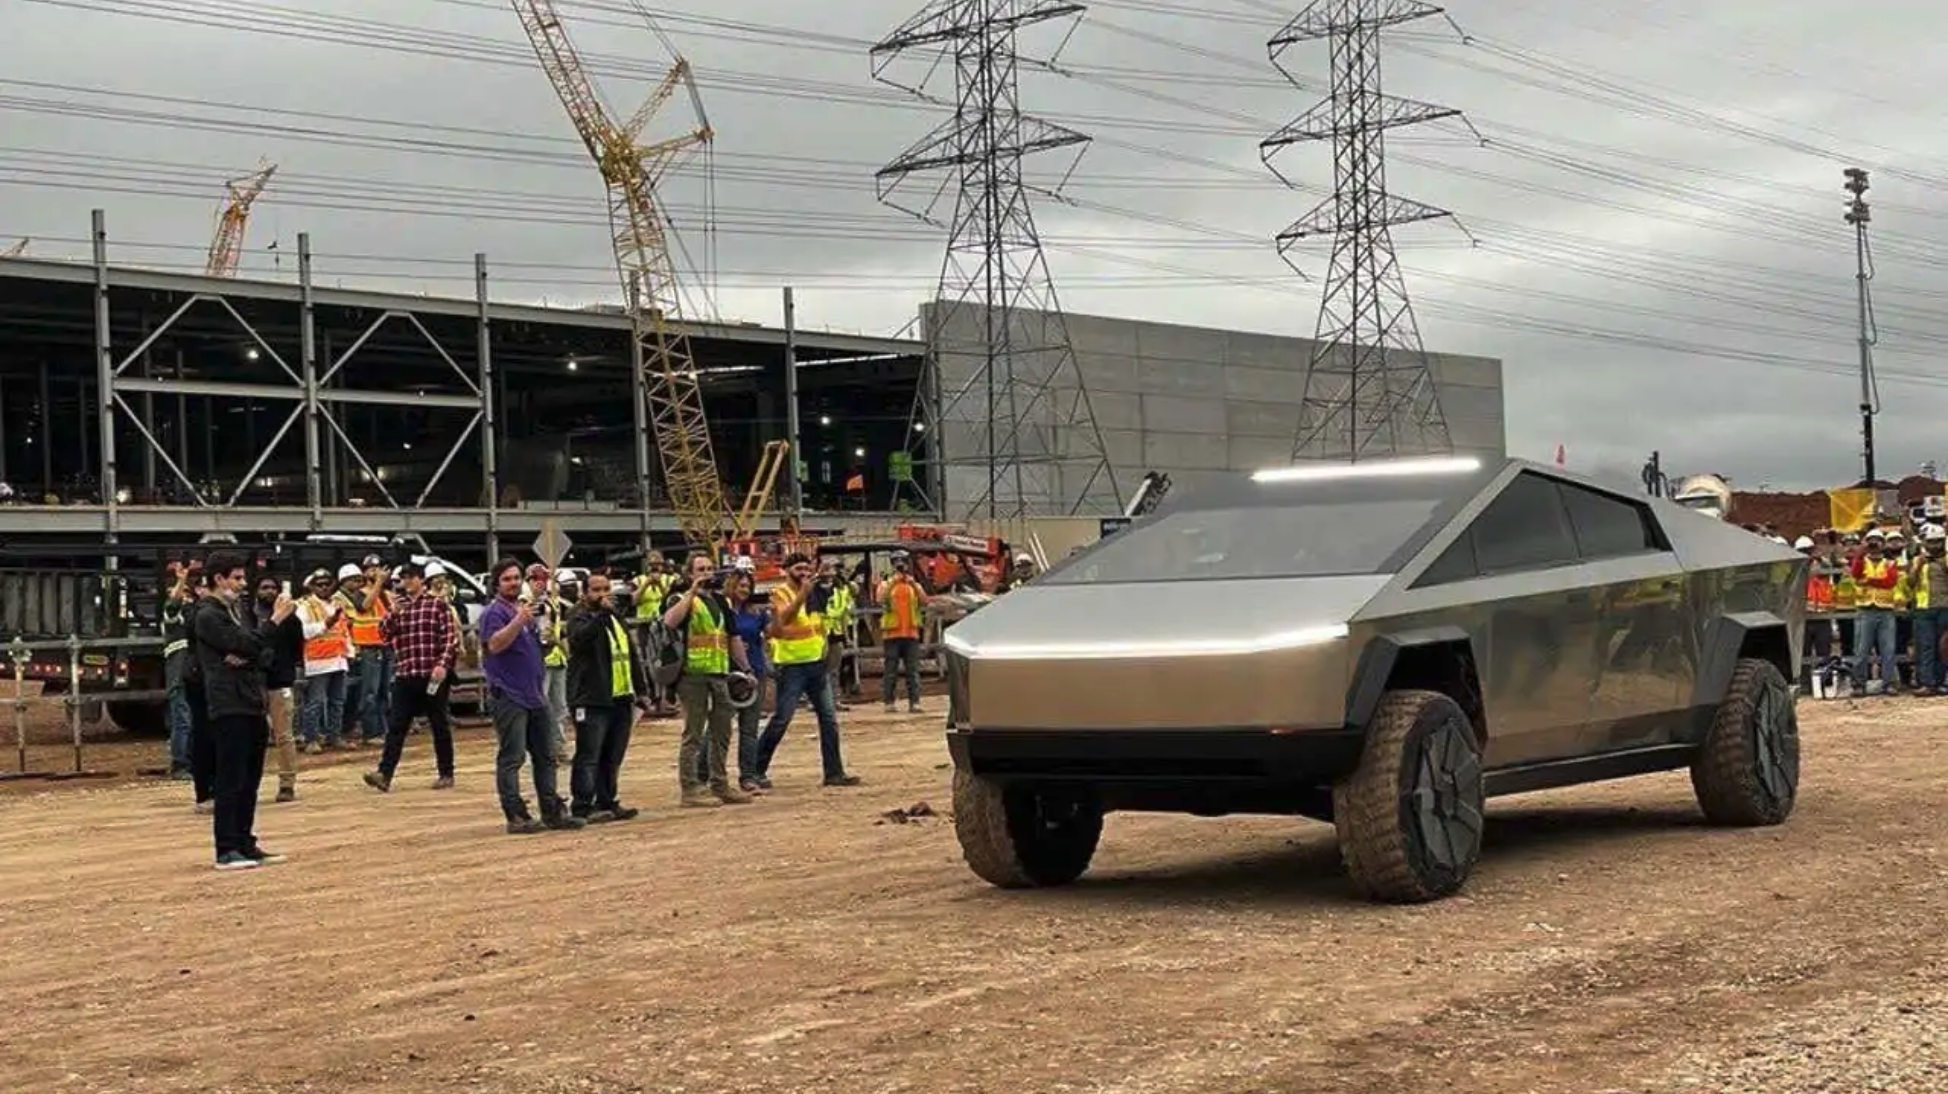 The 2021 Tesla Cybertruck at a construction site like a work truck